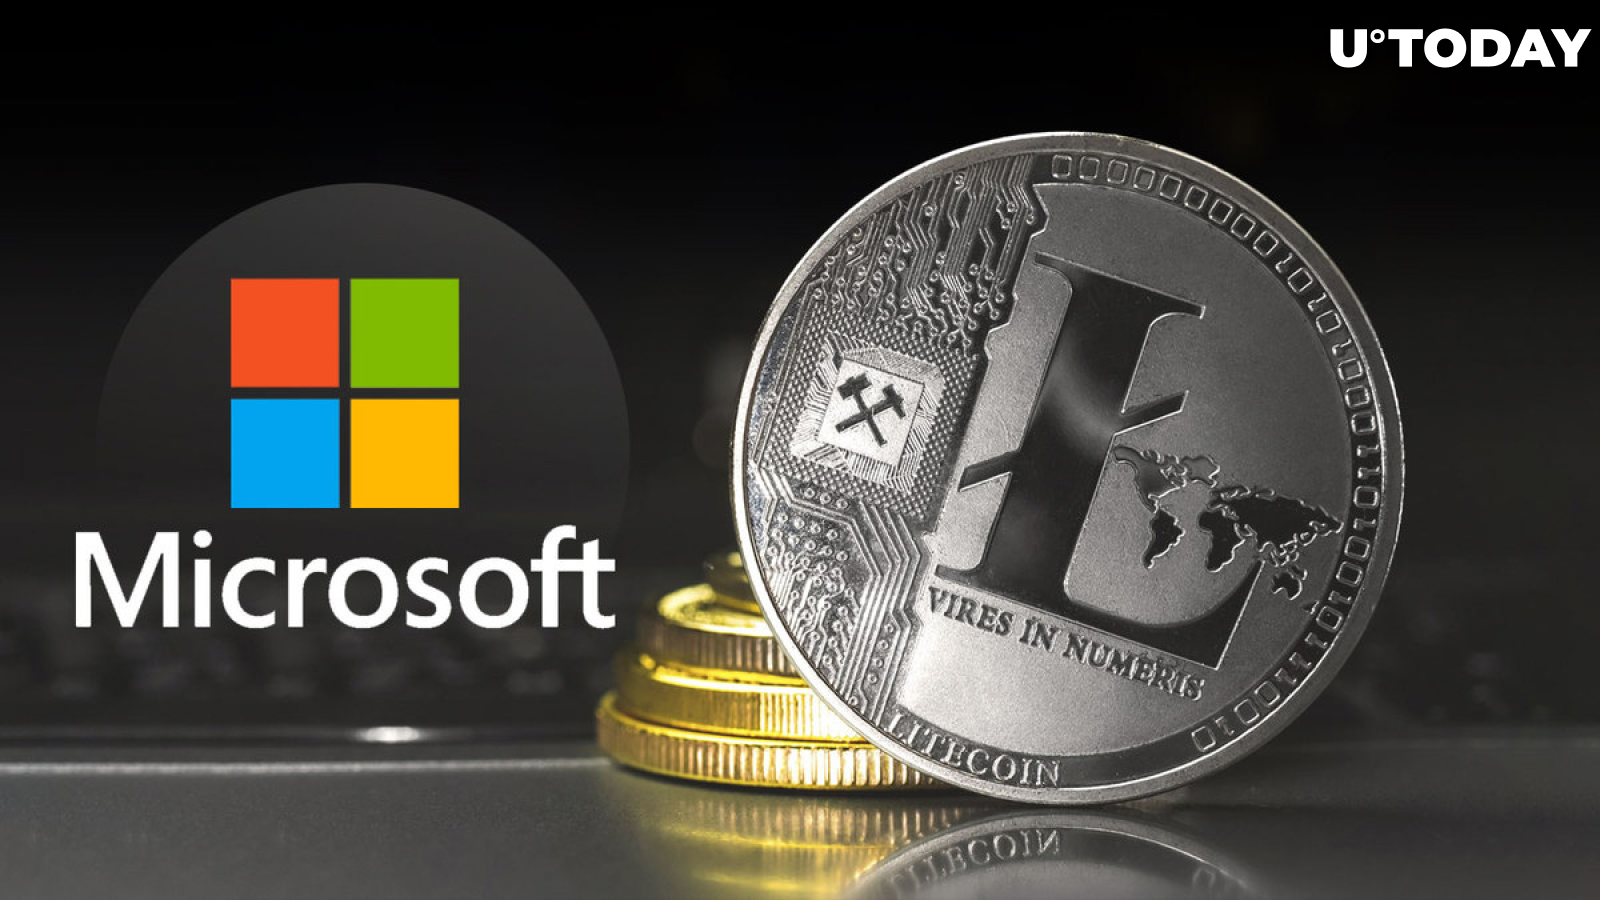 Litecoin (LTC) Now Accepted for Microsoft Payments: Details